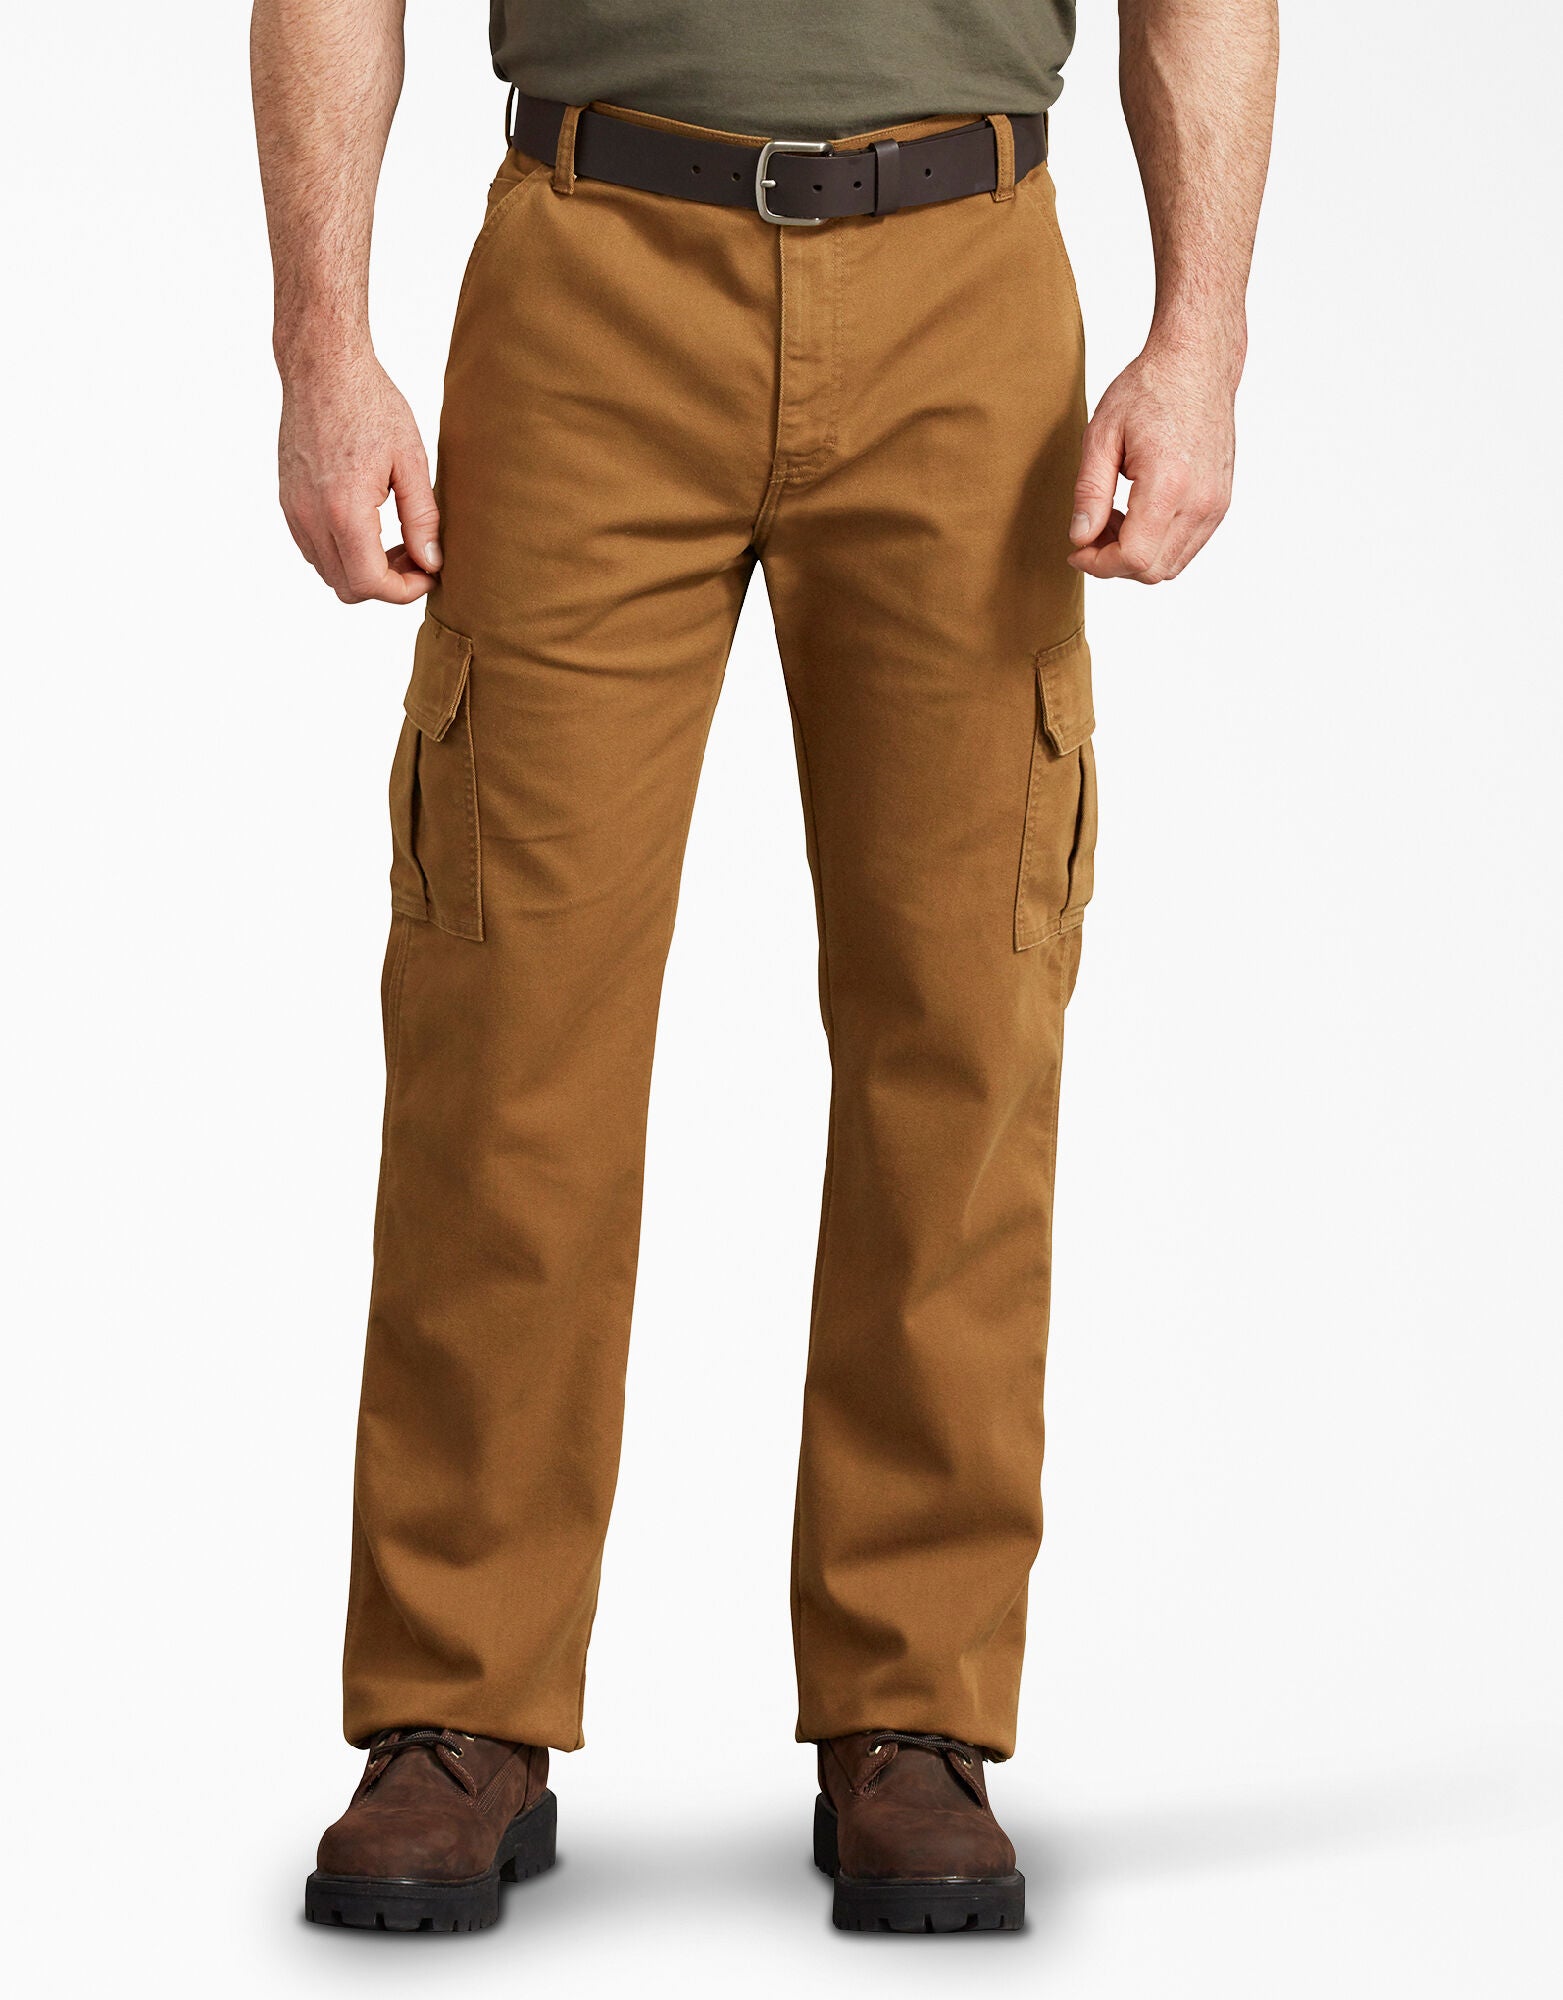 TOUGH DUCK FLEX TWILL CARGO PANT - Mucksters Supply Corp